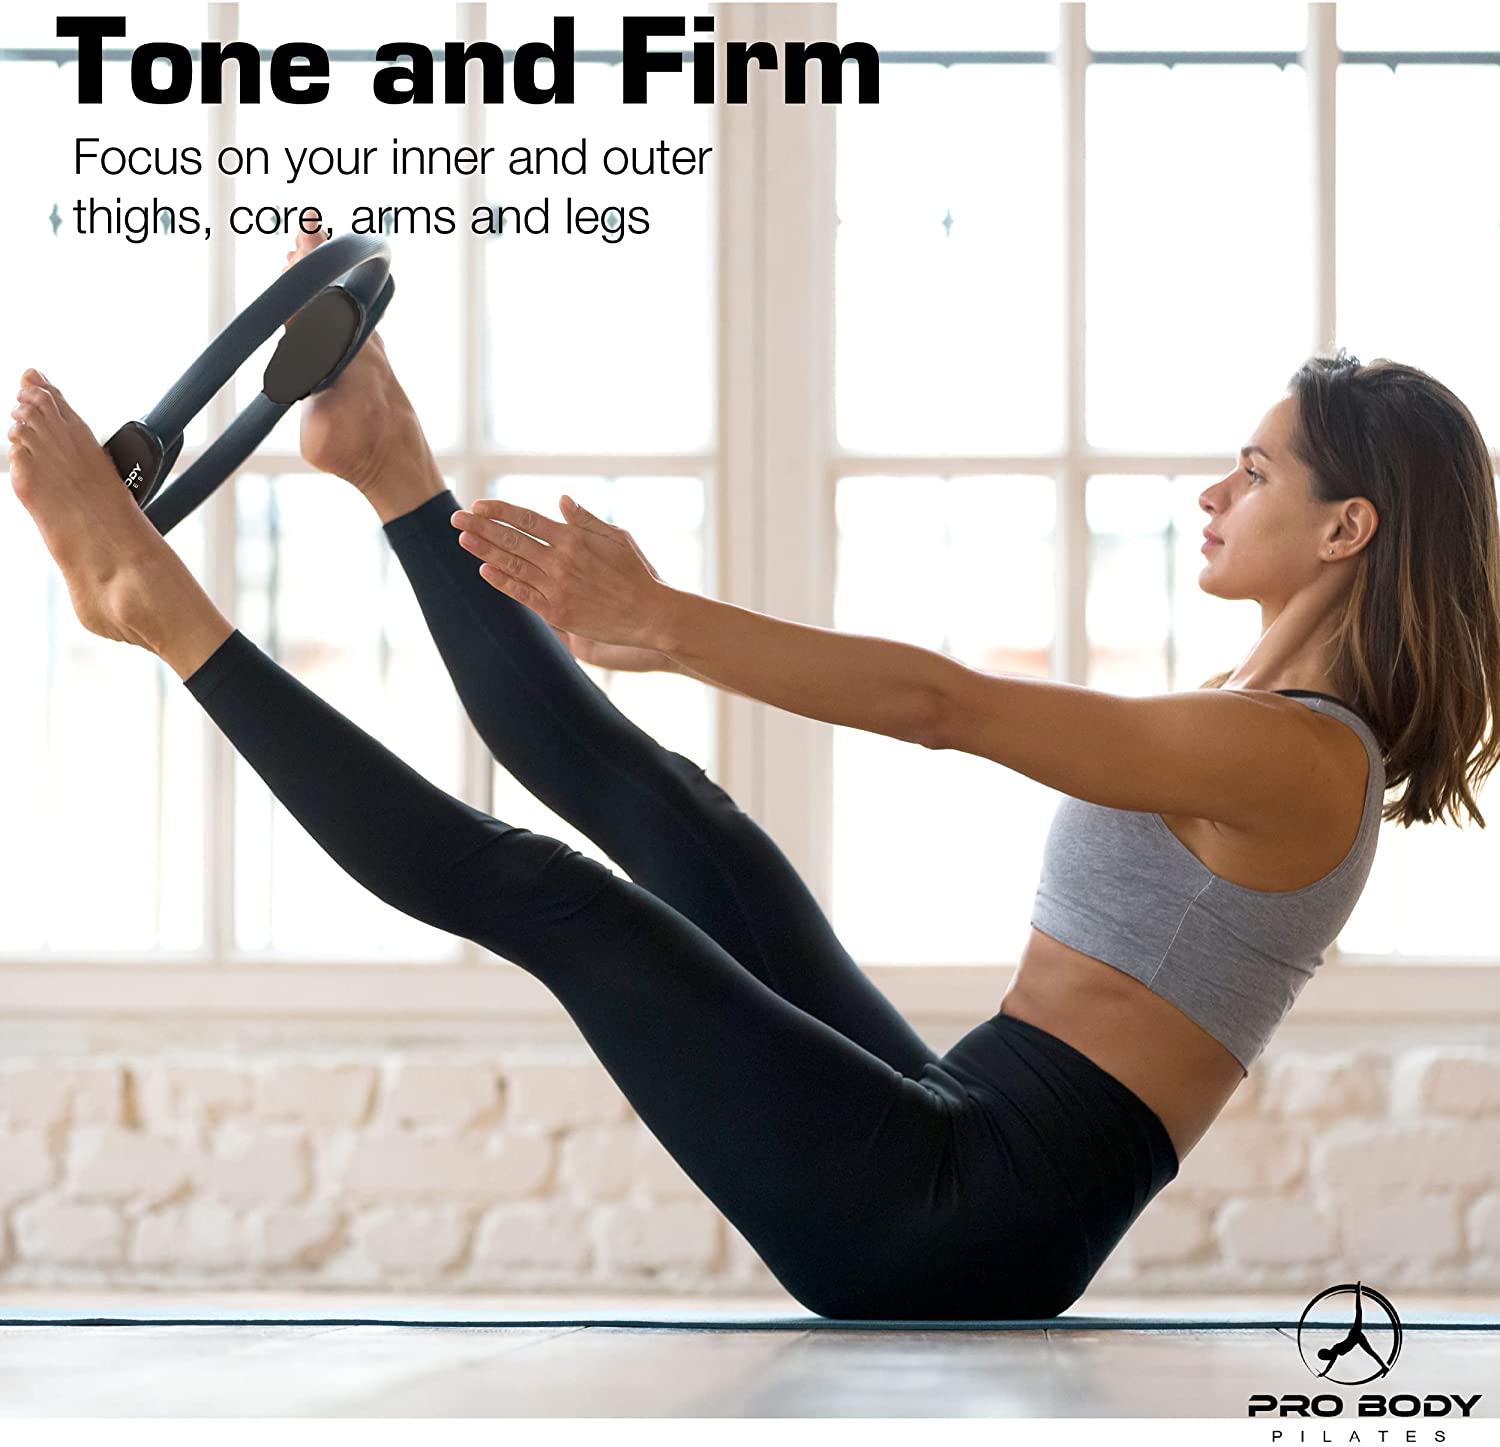 Pilates Ring - Superior Unbreakable Pilates Circle For Focused Toning